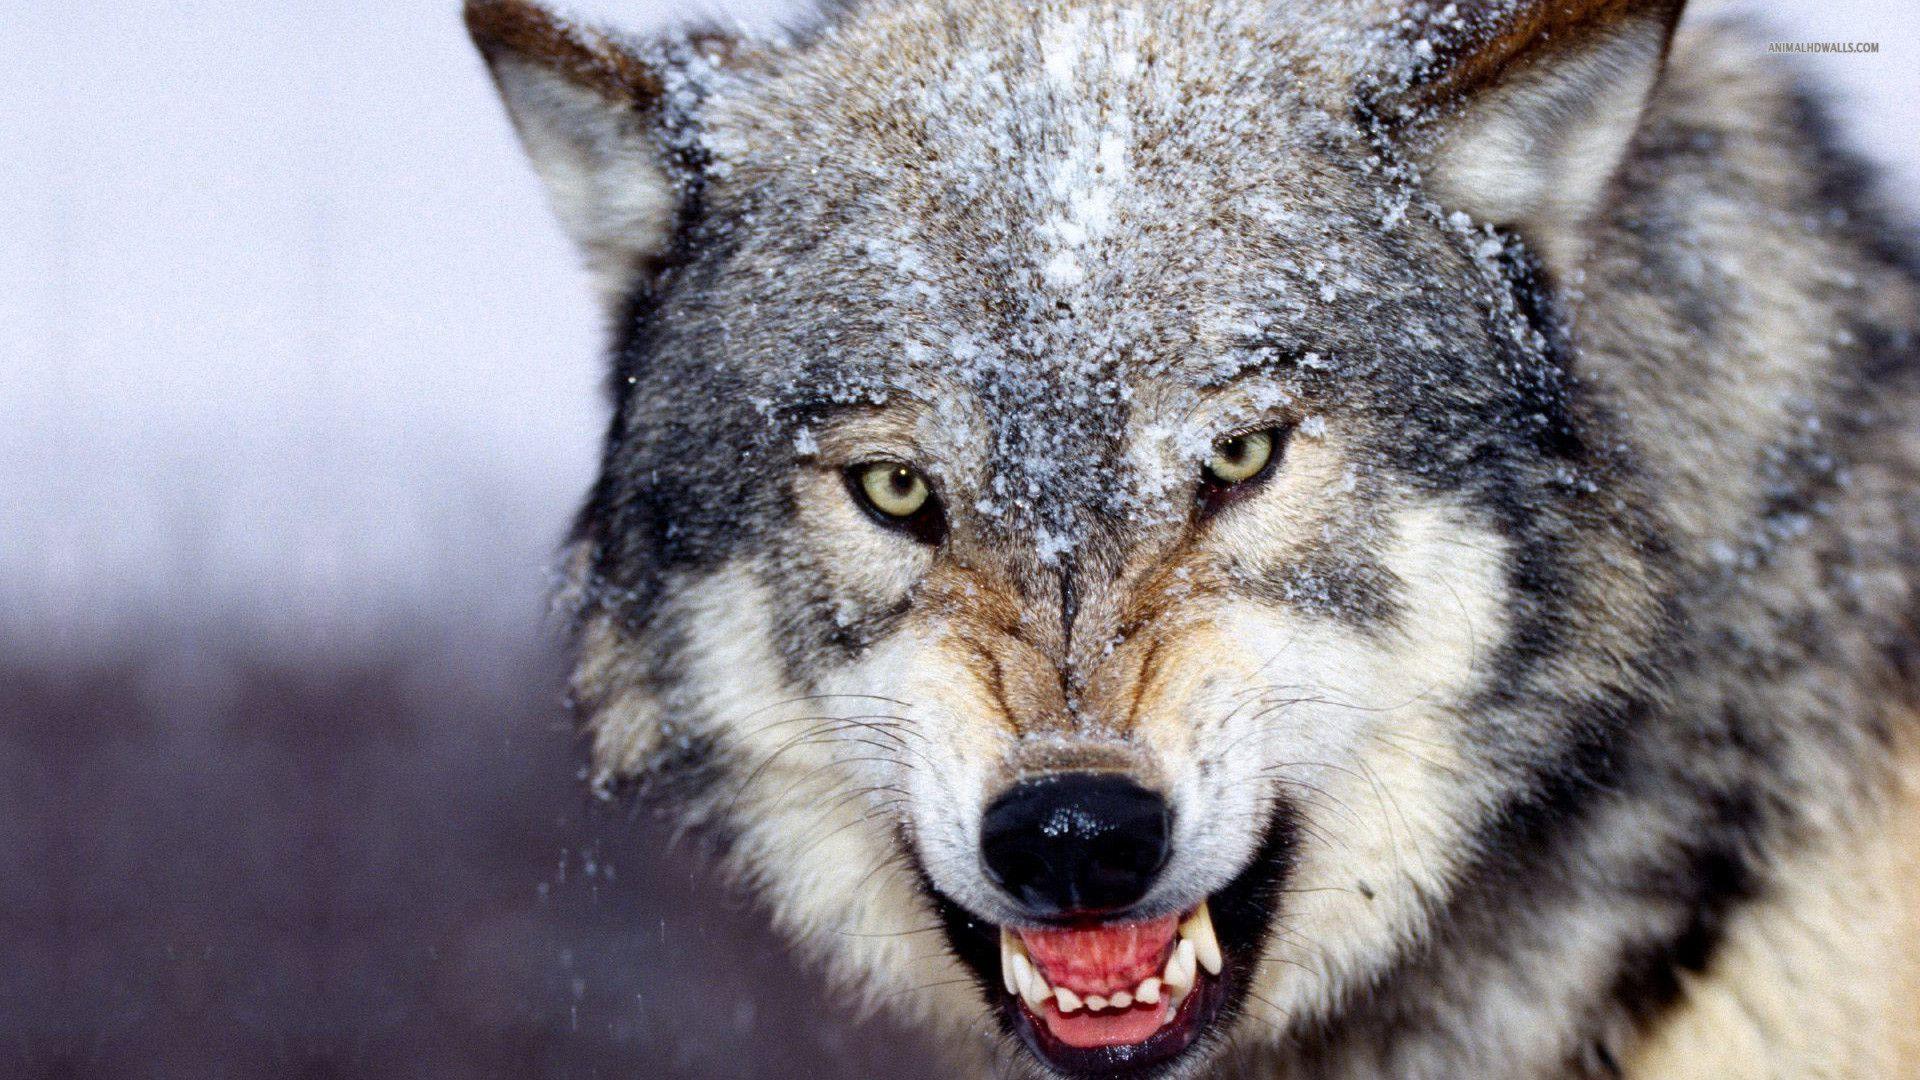 Teen Wakes Up To Wolf Eating His Head | Unofficial Networks